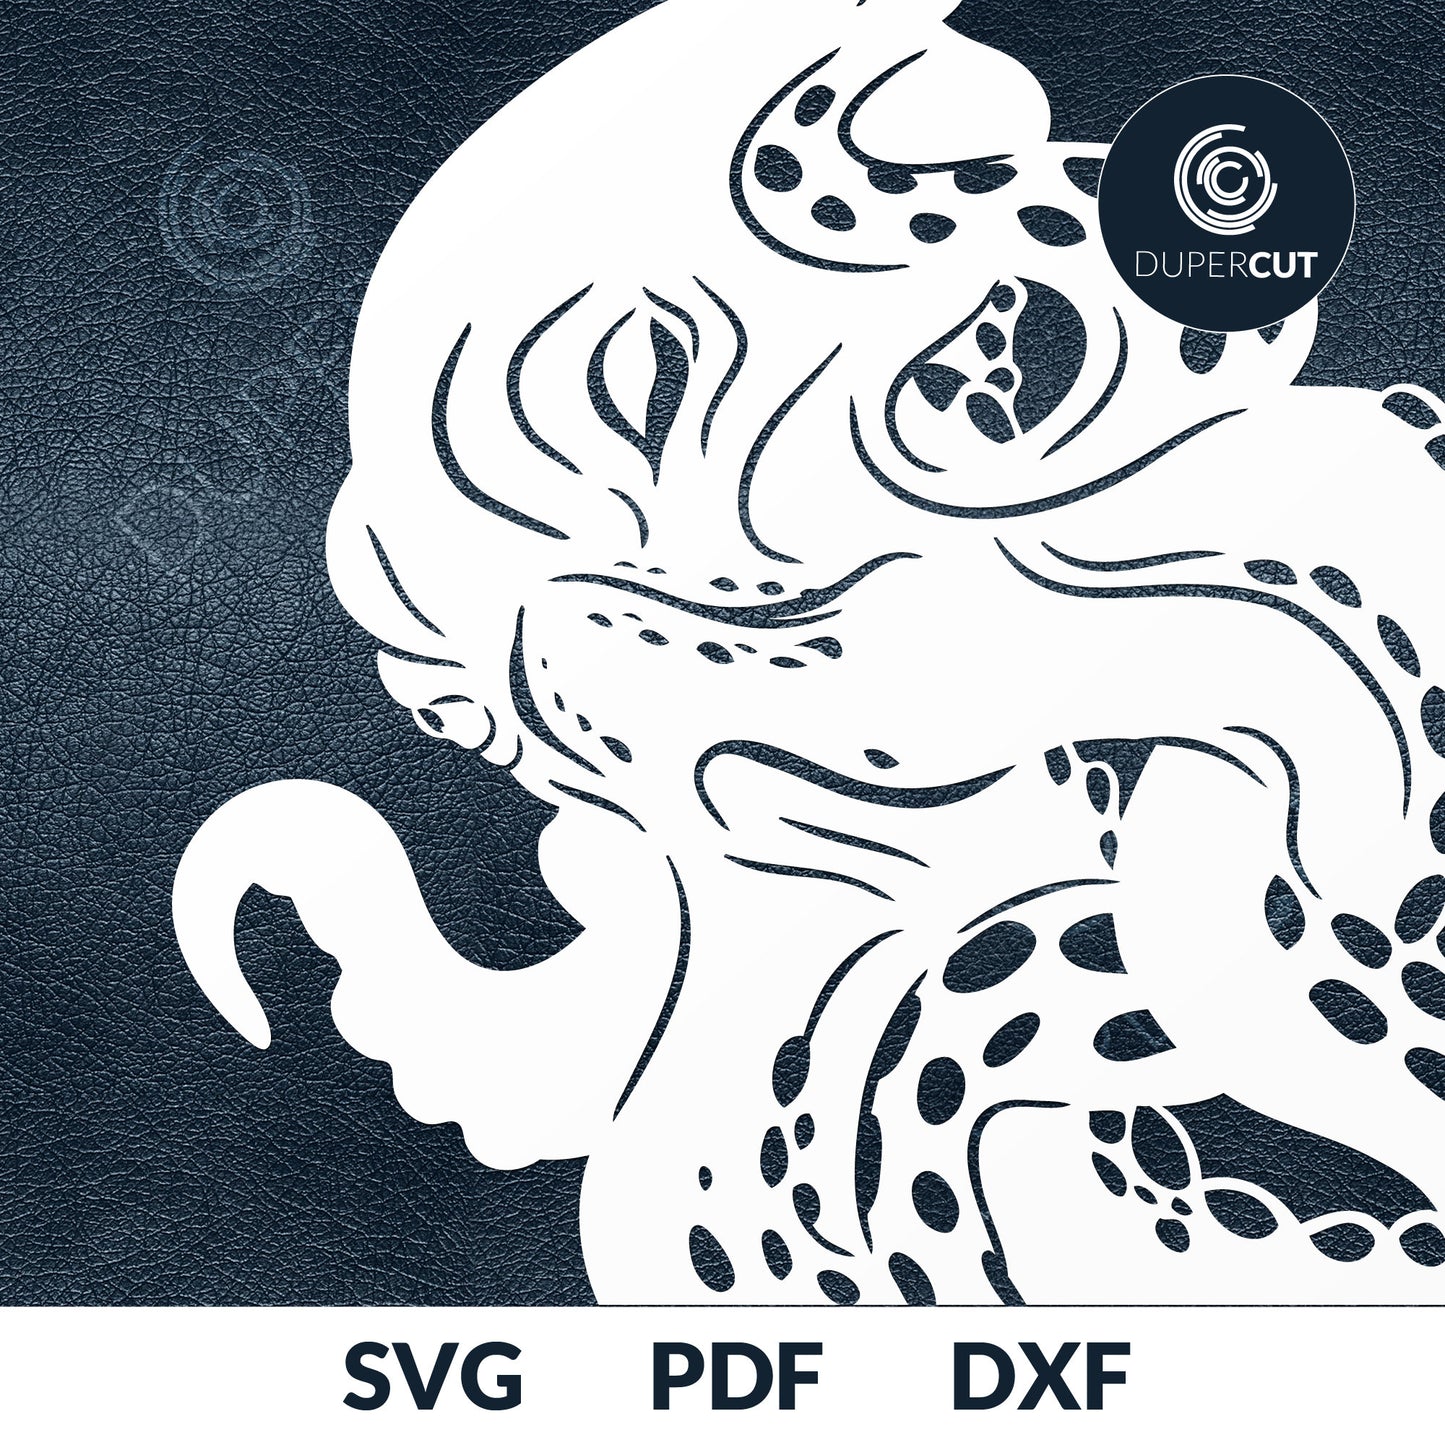 Octopus detailed. SVG JPEG DXF files. Template for paper cutting, laser, print on demand. For use with Cricut, Glowforge, Silhouette Cameo, CNC machines. Personal or commercial license.